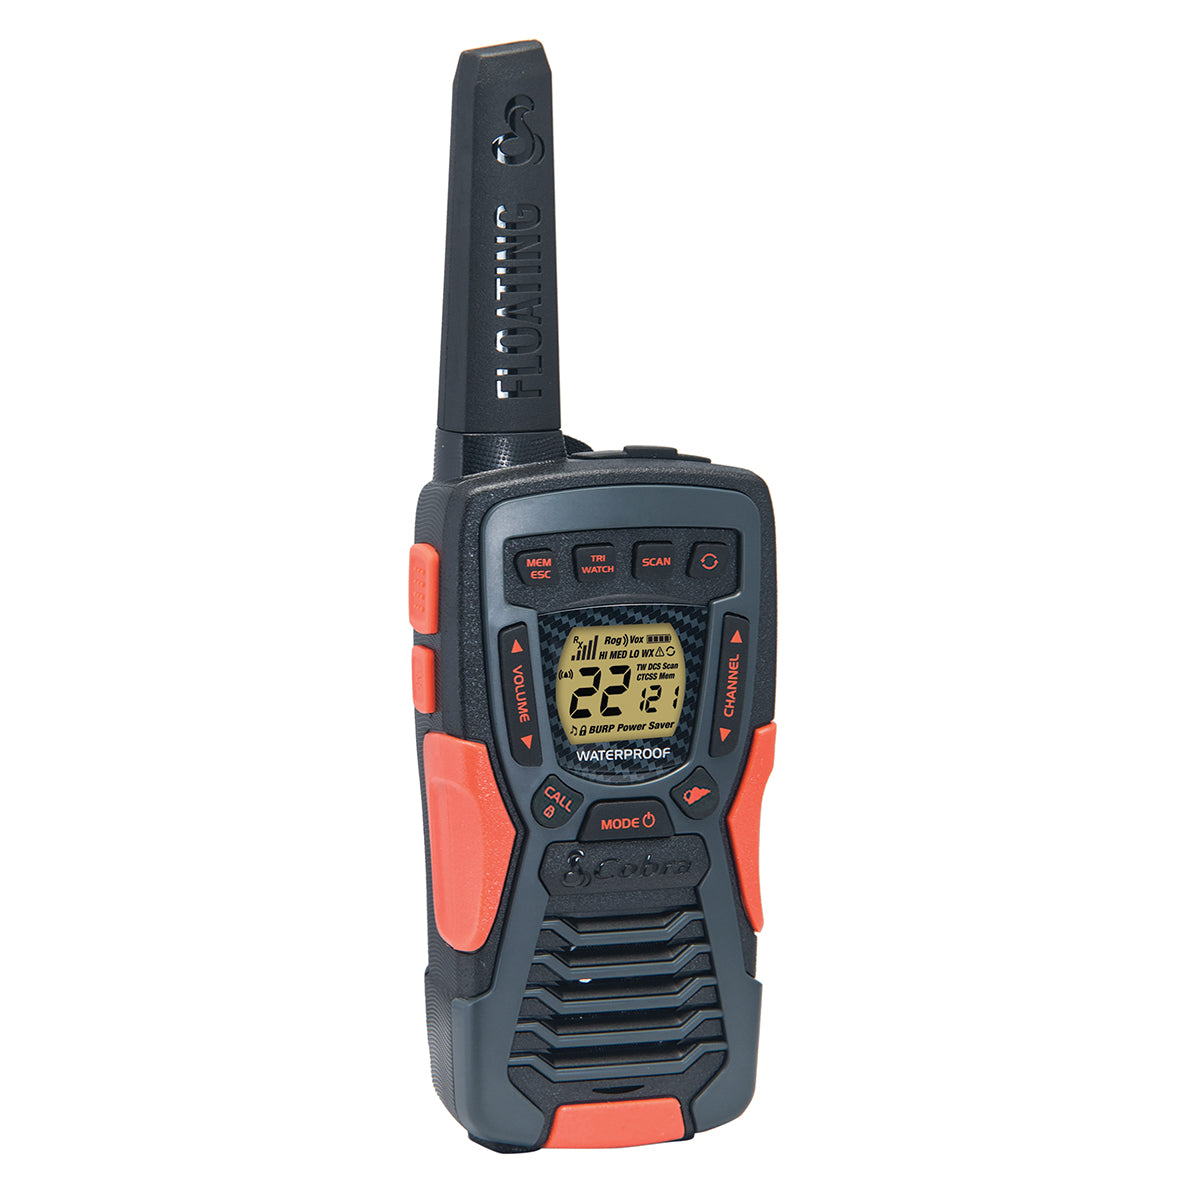 Cobra ACXT1035R FLT Floating Walkie Talkies for Adults Waterproof, Rechargeable, Long Range up to 37-Mile Two Way Radio with NOAA Weather Alert ＆ V - 4